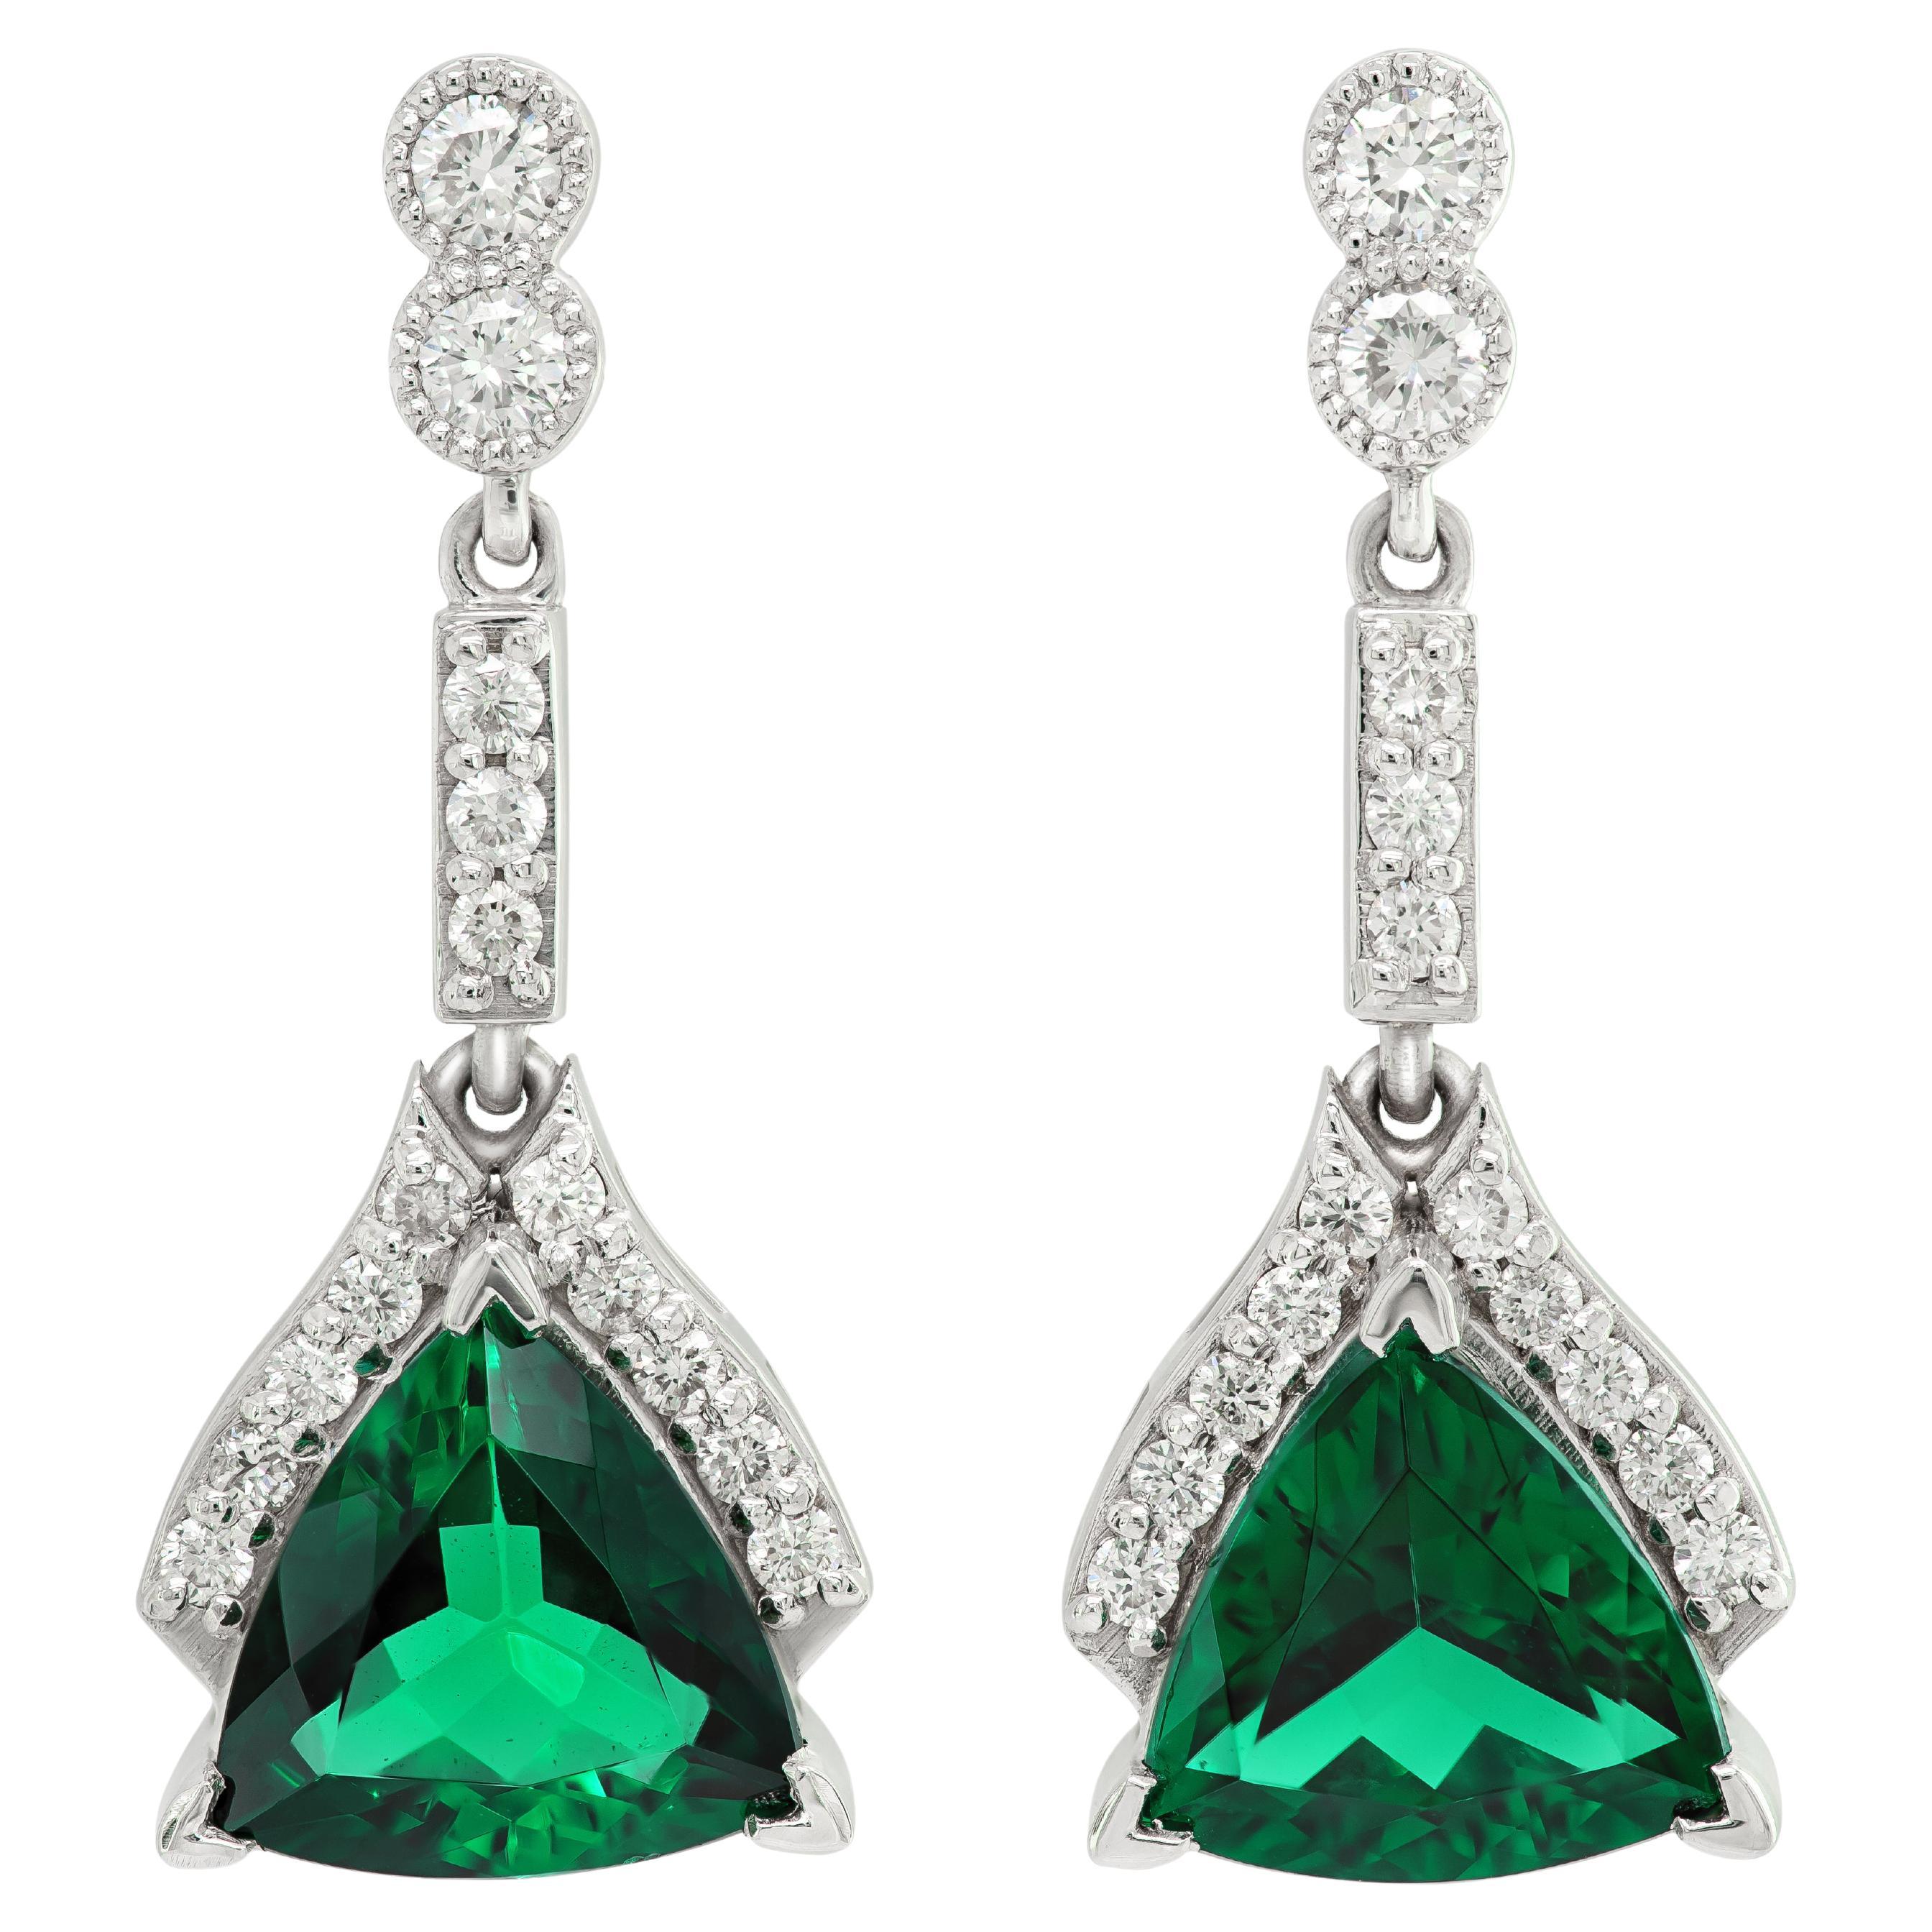  Natural Blue-Green Tourmaline 2.89 Carats in White Gold Earrings with Diamonds